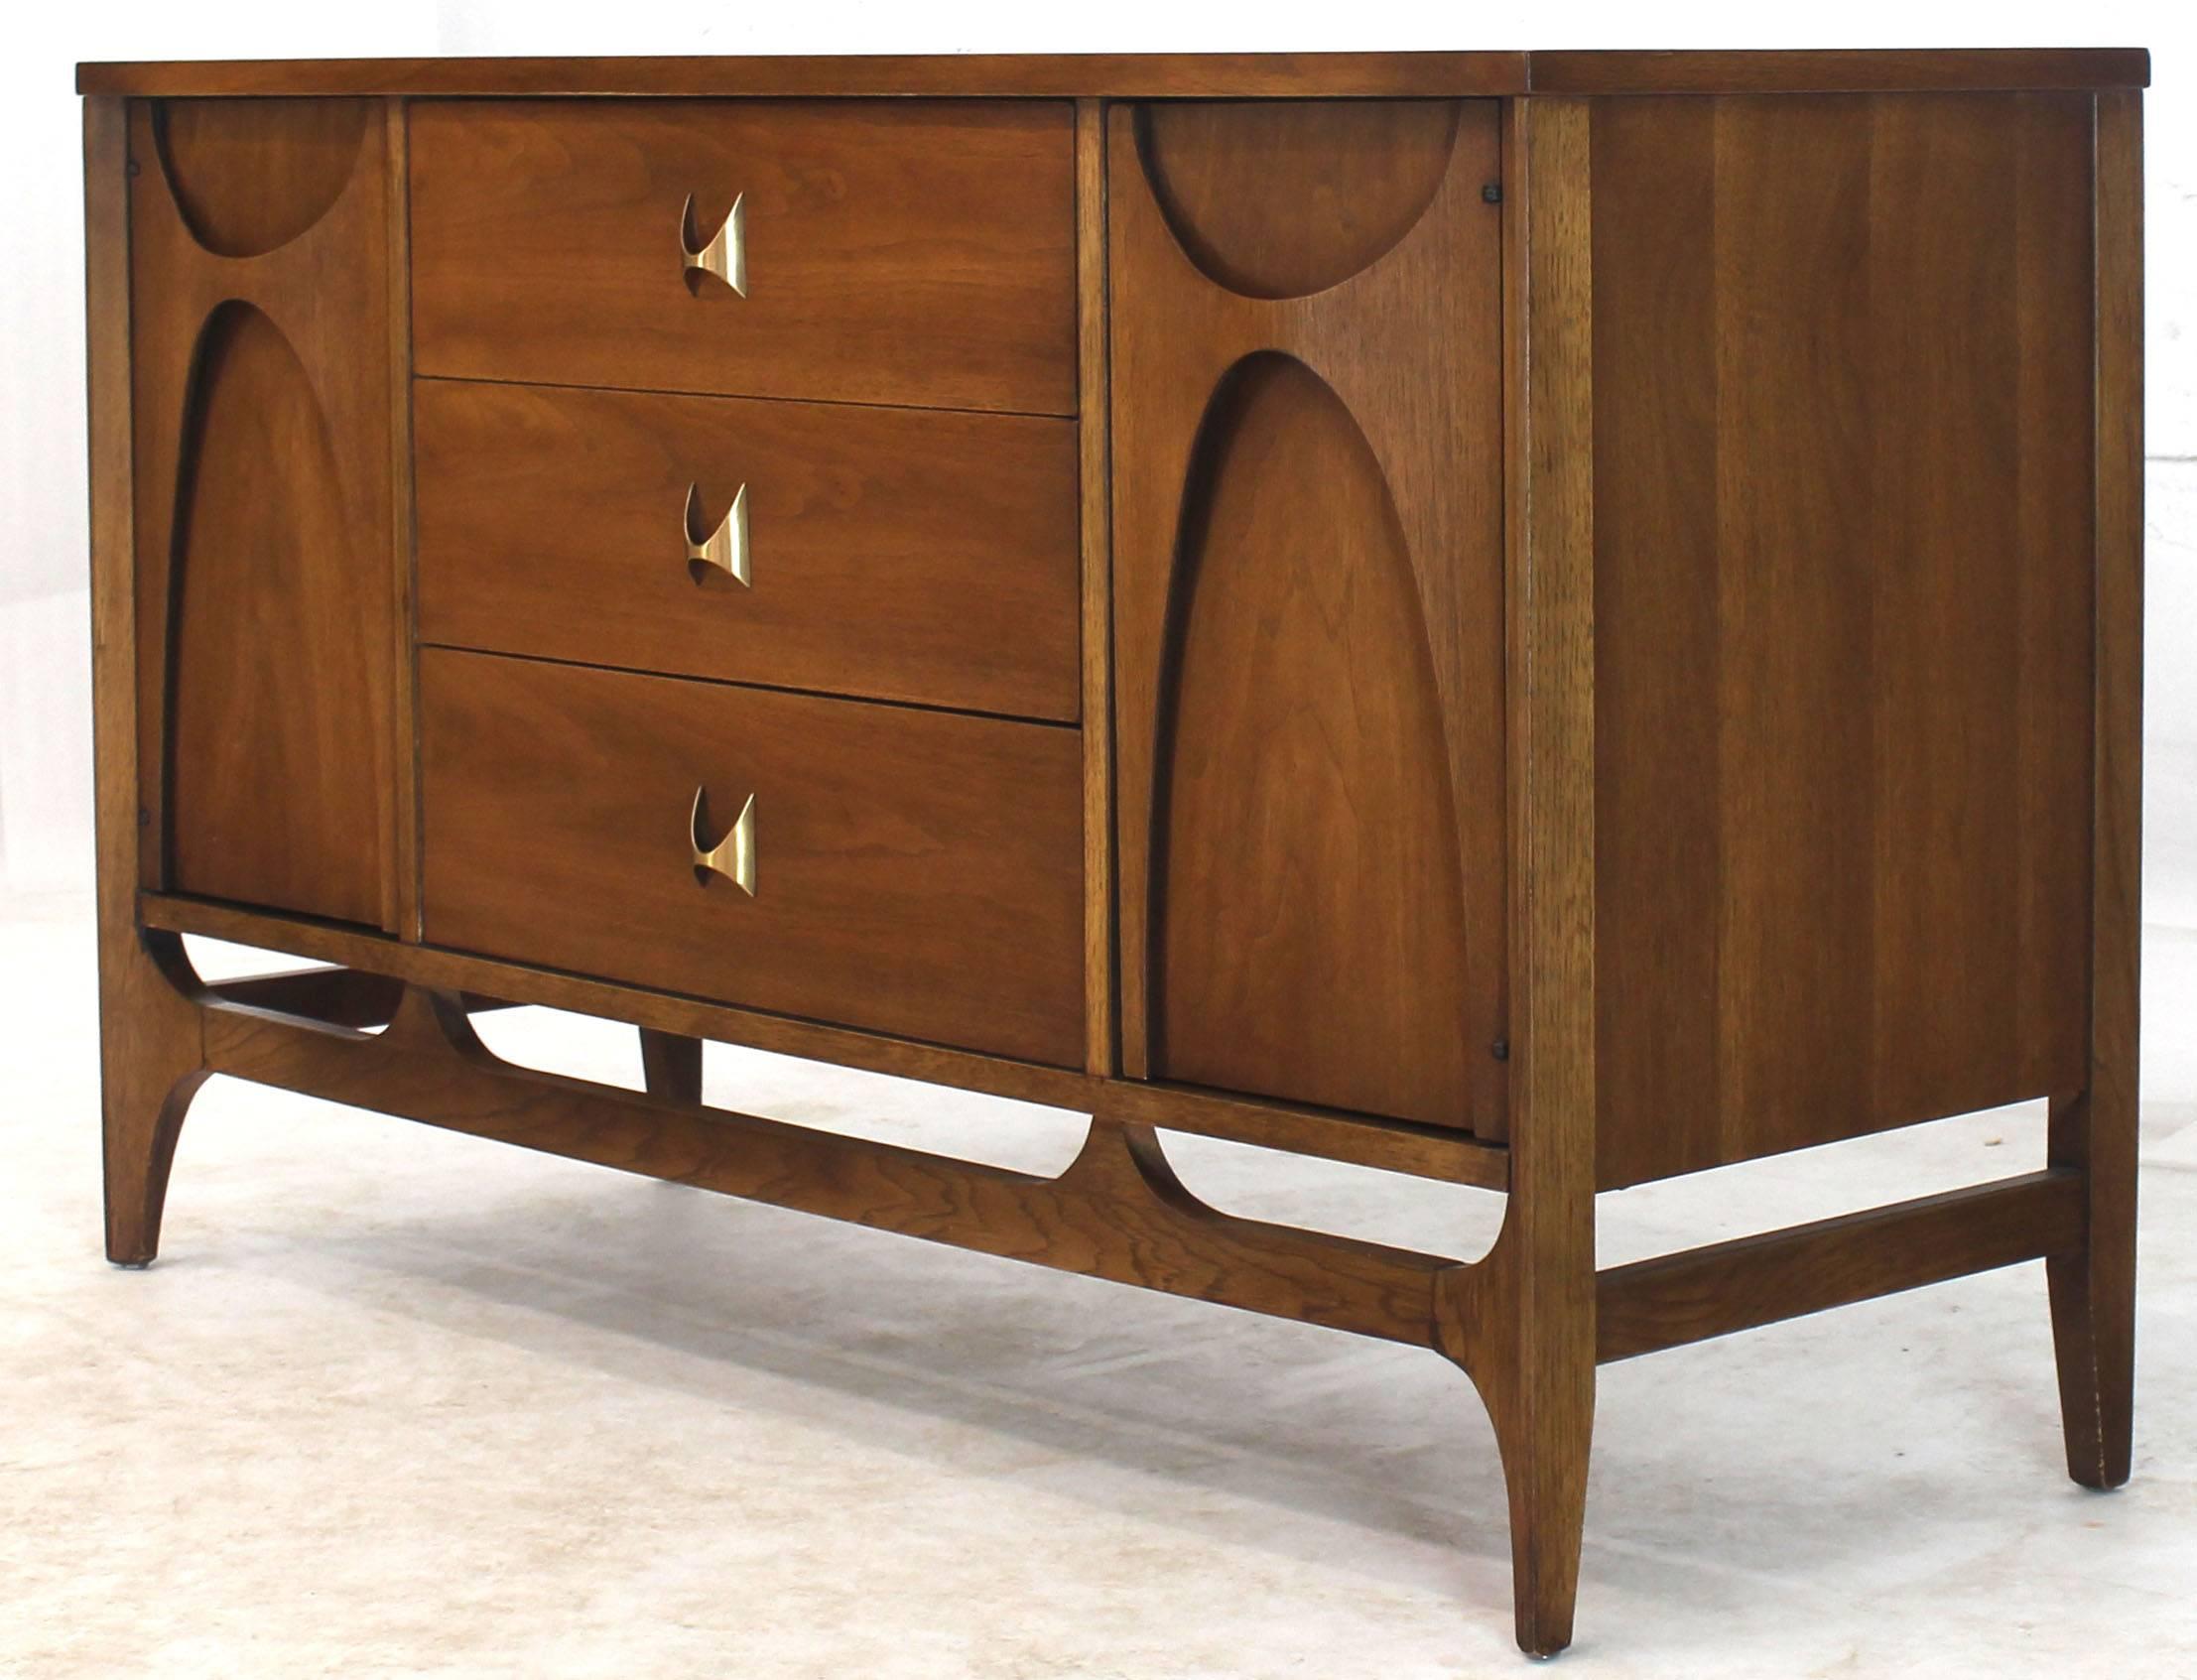 Mid-Century Modern compact dresser sideboard credenza cabinet with sculptural elements in excellent original condition.